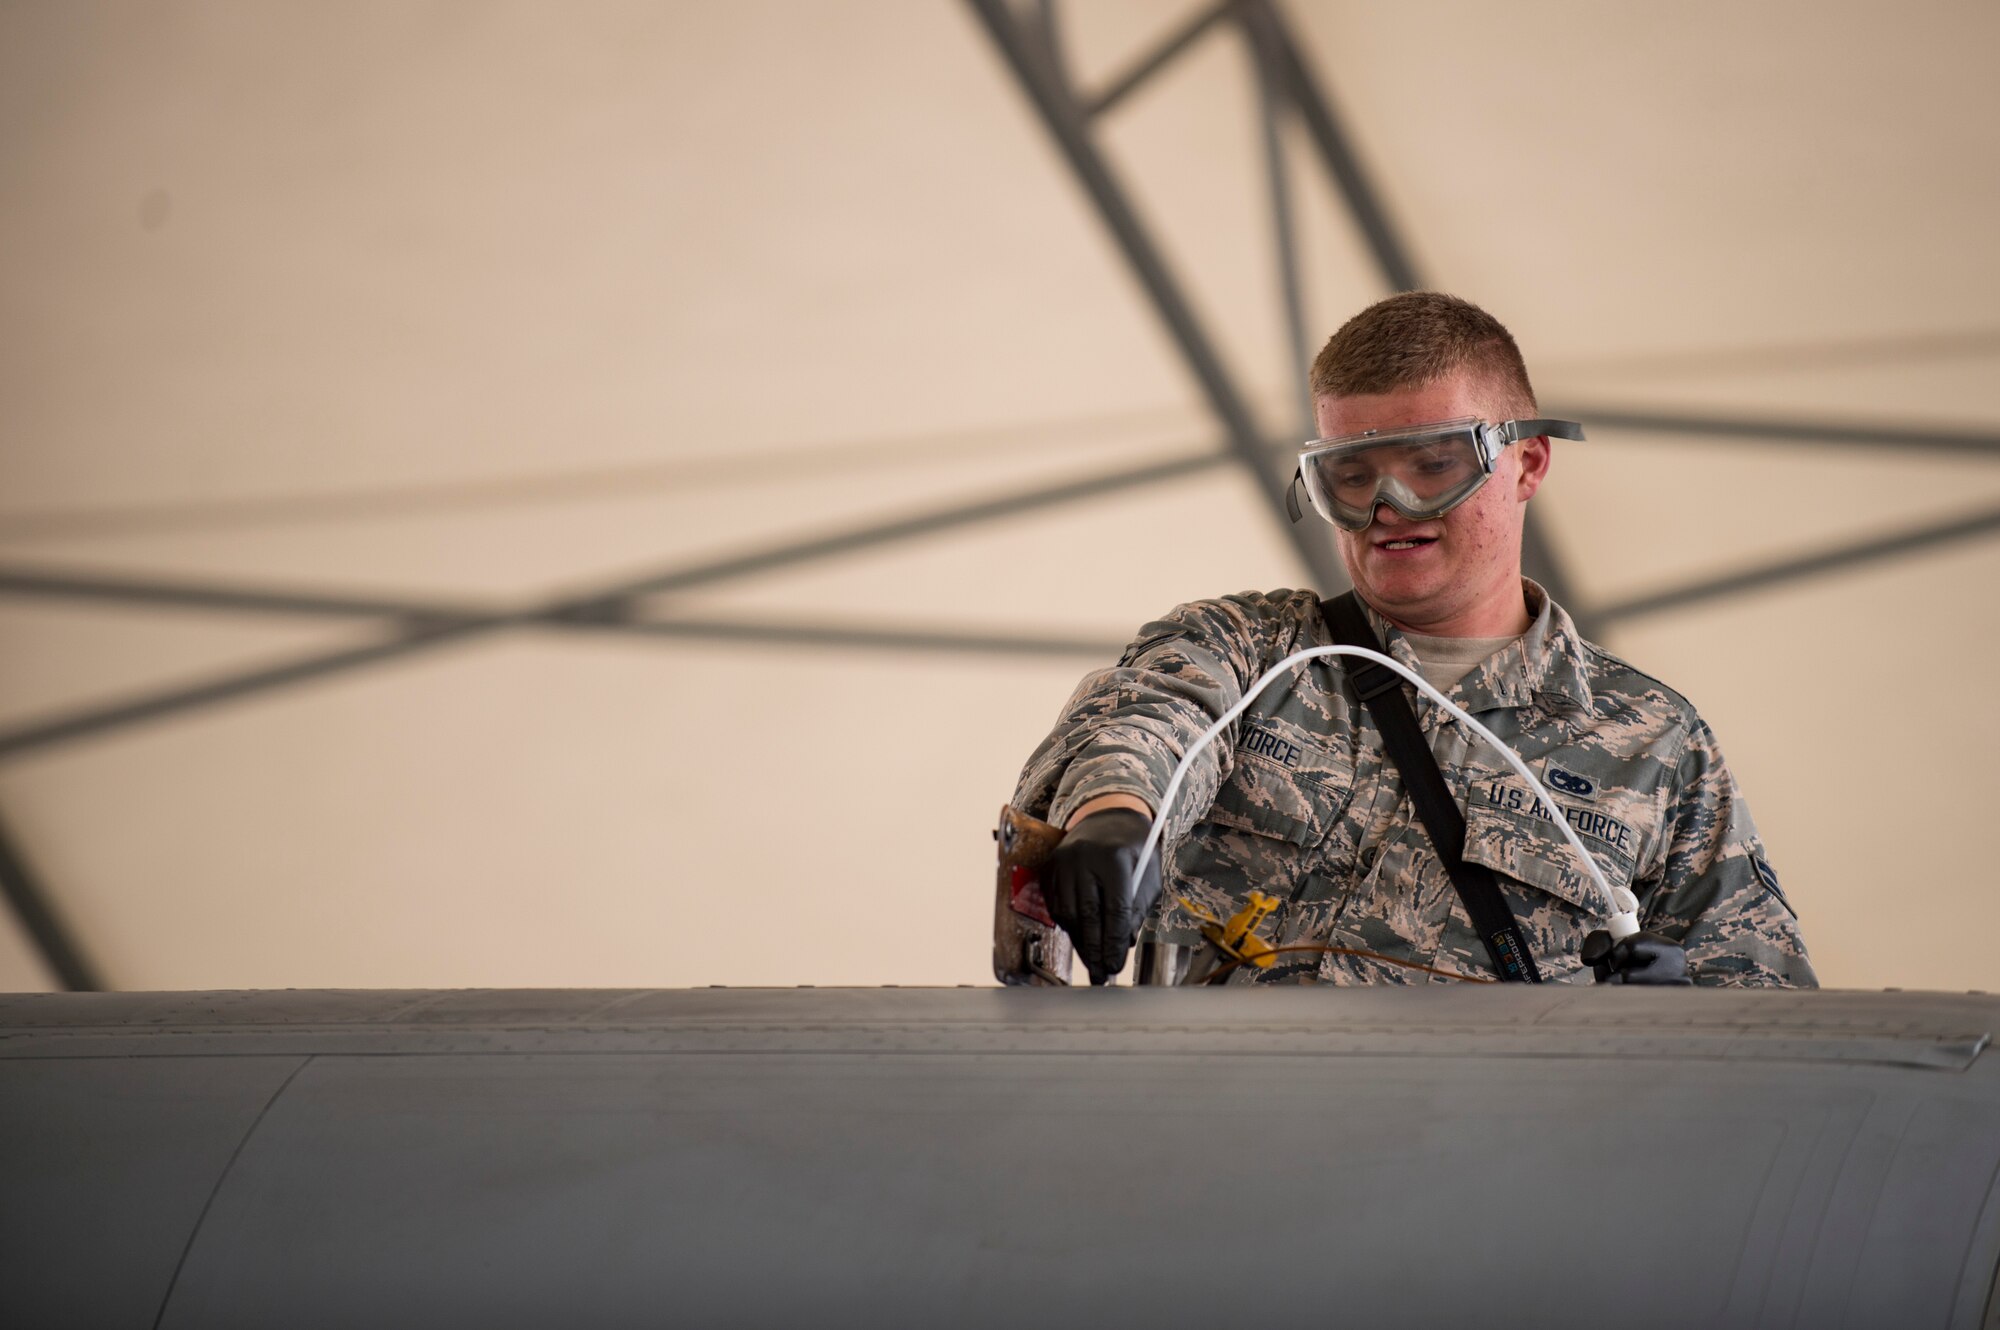 Airman 1st Class Gabriel Vorce, 23d Aircraft Maintenance Squadron crew chief, checks the oil on an A-10C Thunderbolt II during a thru flight inspection, Dec. 7, 2017, at Moody Air Force Base, Ga. Moody recently participated in a week-long, Phase 1, Phase 2 exercise designed to demonstrate the 23d Wing’s ability to meet combatant commander objectives. The exercise tested pilots’ and maintainers’ ability to launch around-the-clock sorties at an accelerated rate during surge operations. (U.S. Air Force photo by Andrea Jenkins)